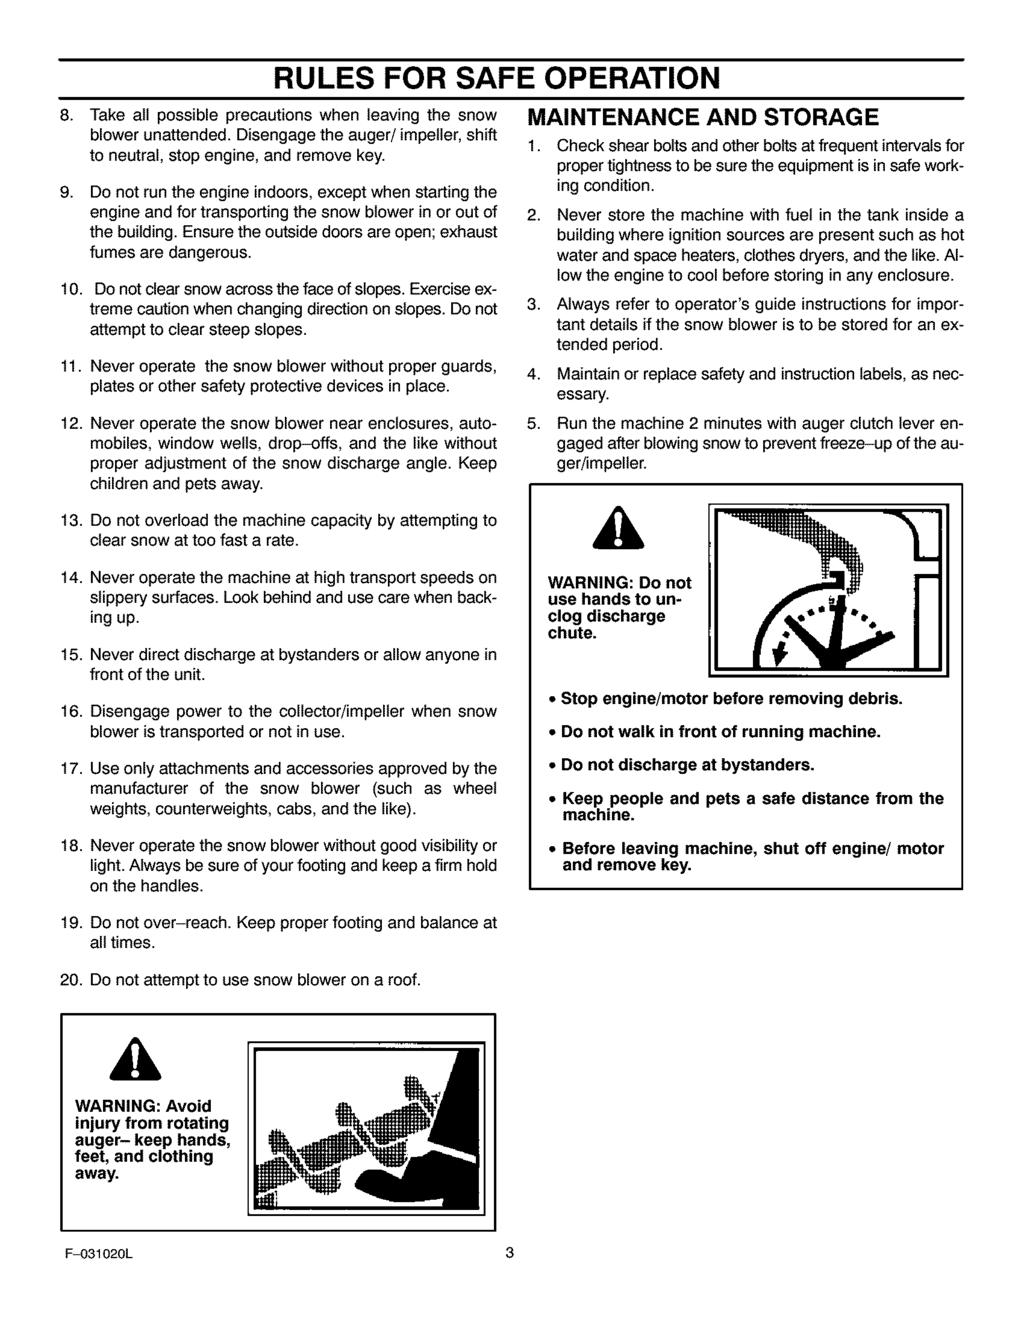 RULES FOR SAFE OPERATION 8. Take all possible precautions when leaving the snow blower unattended. Disengage the auger/impeller, shift to neutral, stop engine, and remove key. 9.